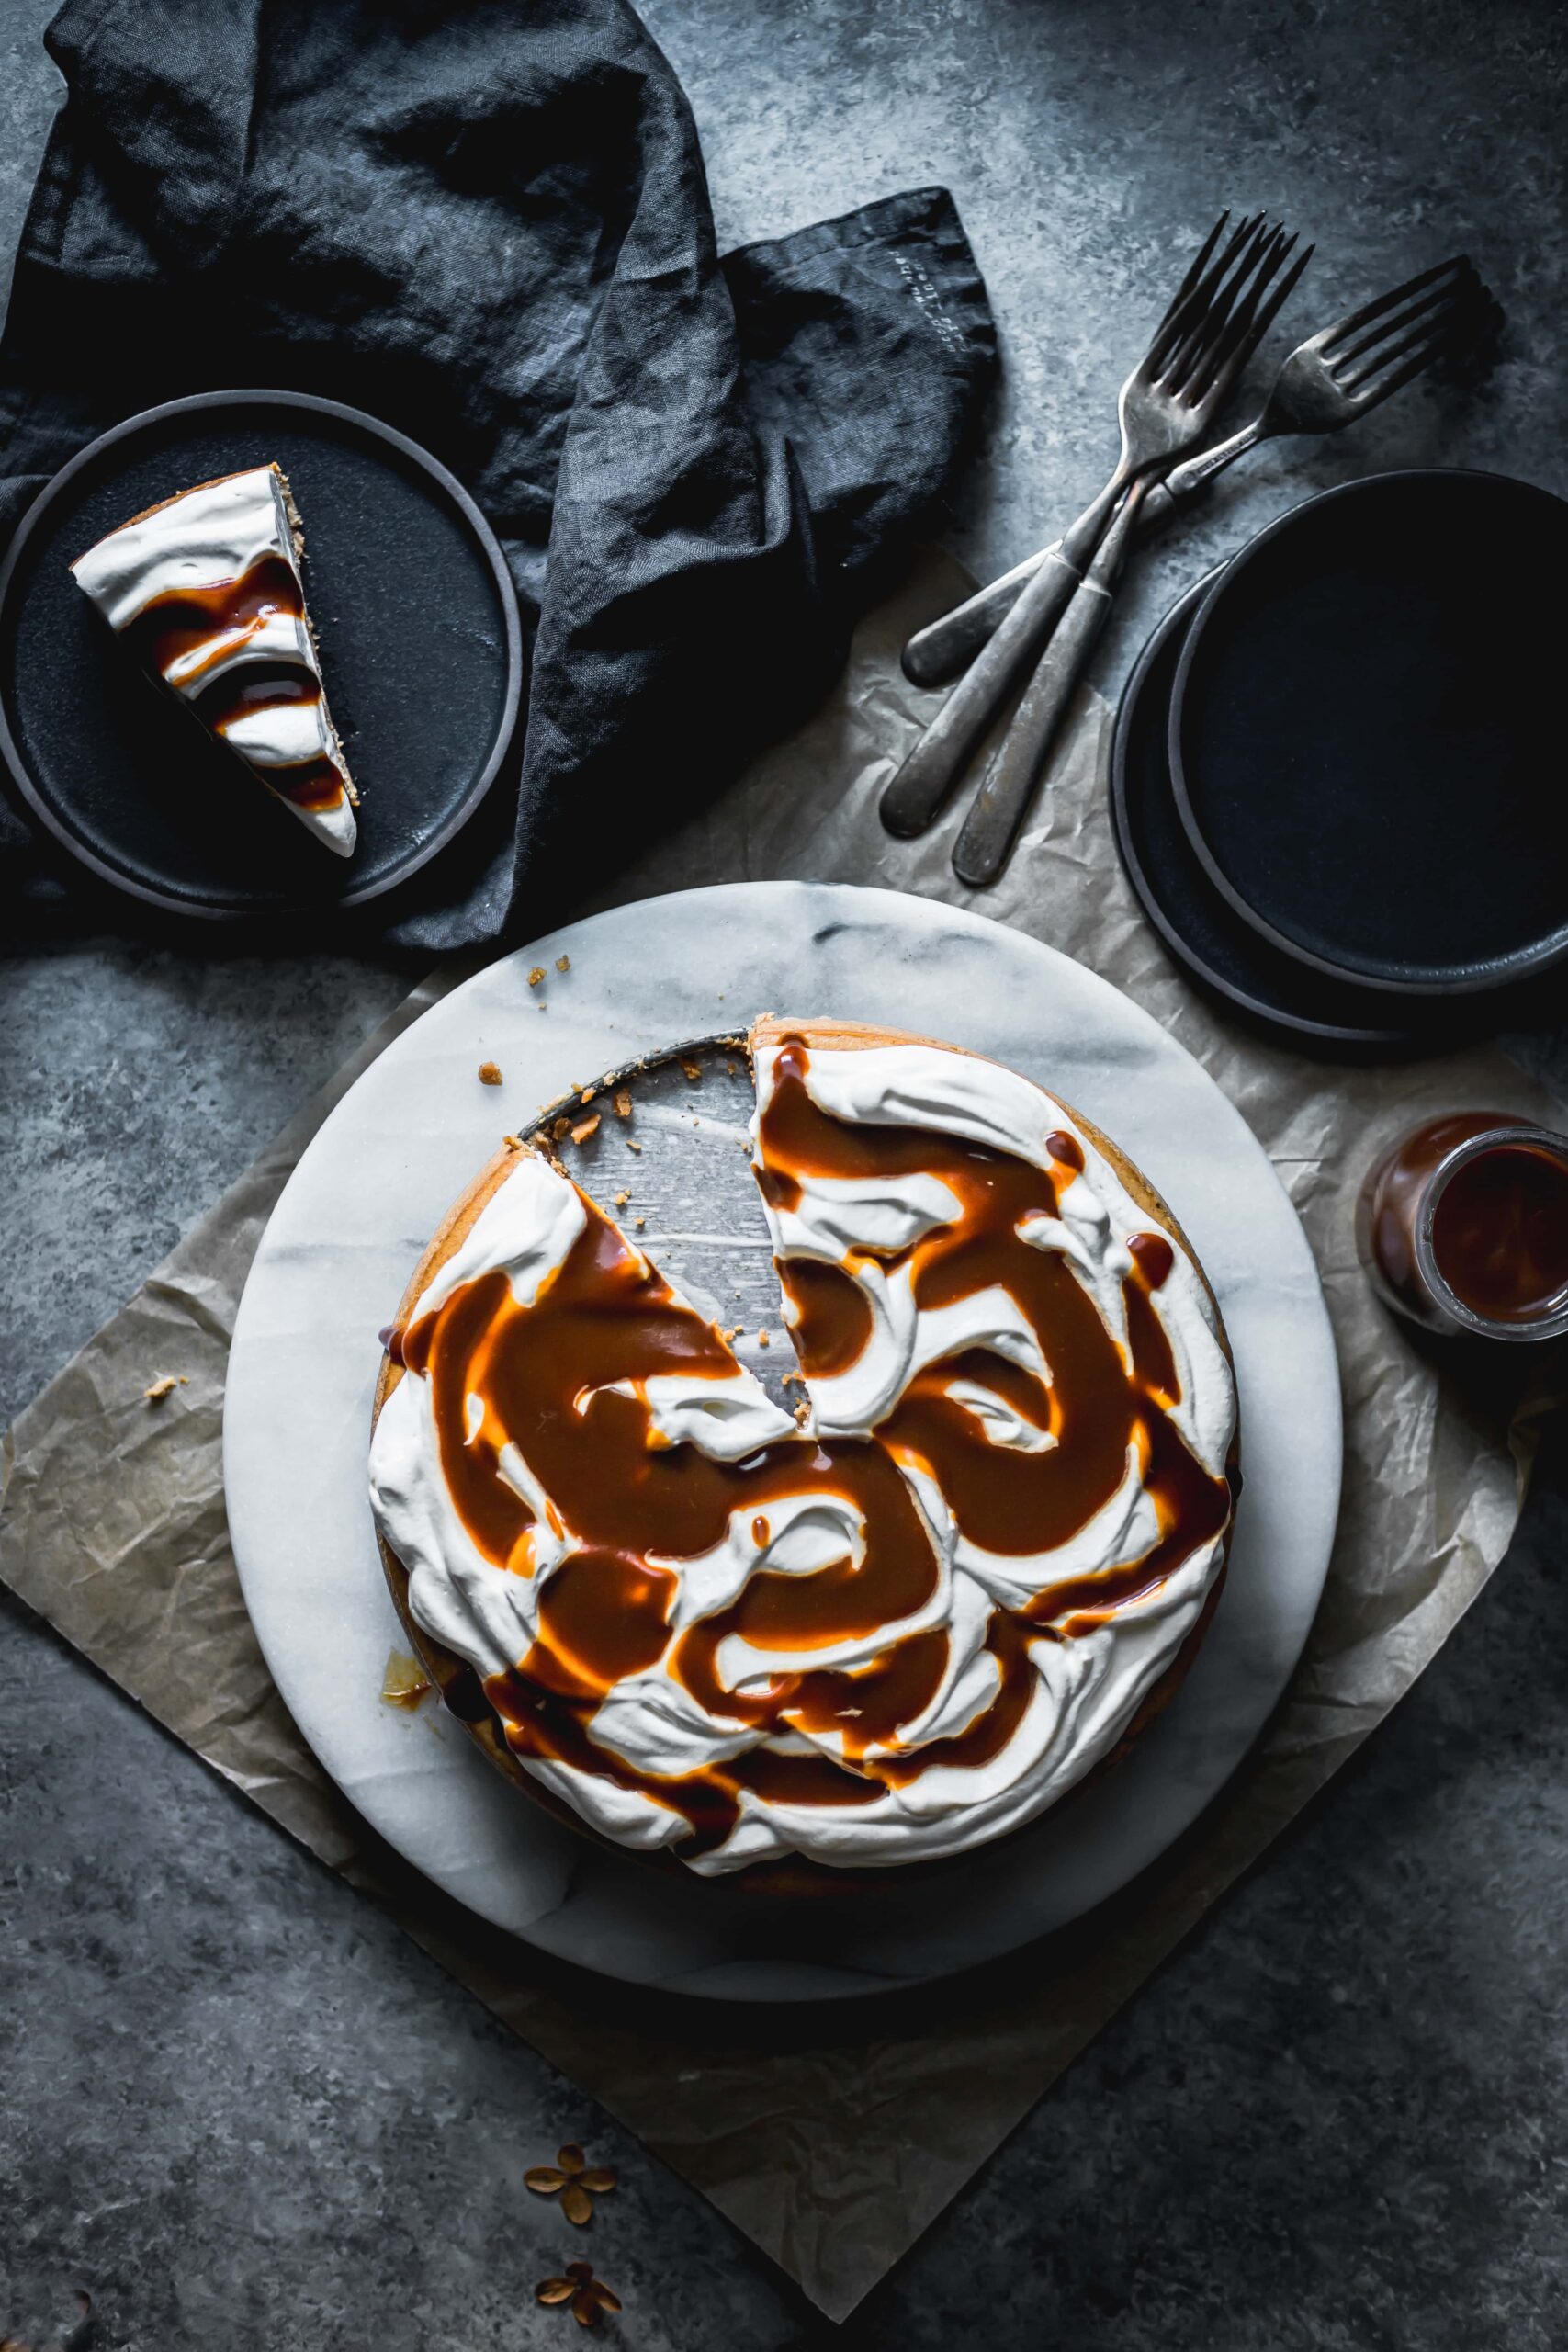 A gingerbread cheesecake topped with whipped cream and golden caramel sauce drizzled in swirls on top. The cake rests on a circular white marble platter. There is a slice cut out of the cake, and the slice sits on a black plate nearby with a black napkin, three forks, and extra black plates. The background is a dark grey concrete color, and the picture is dark and moody. 